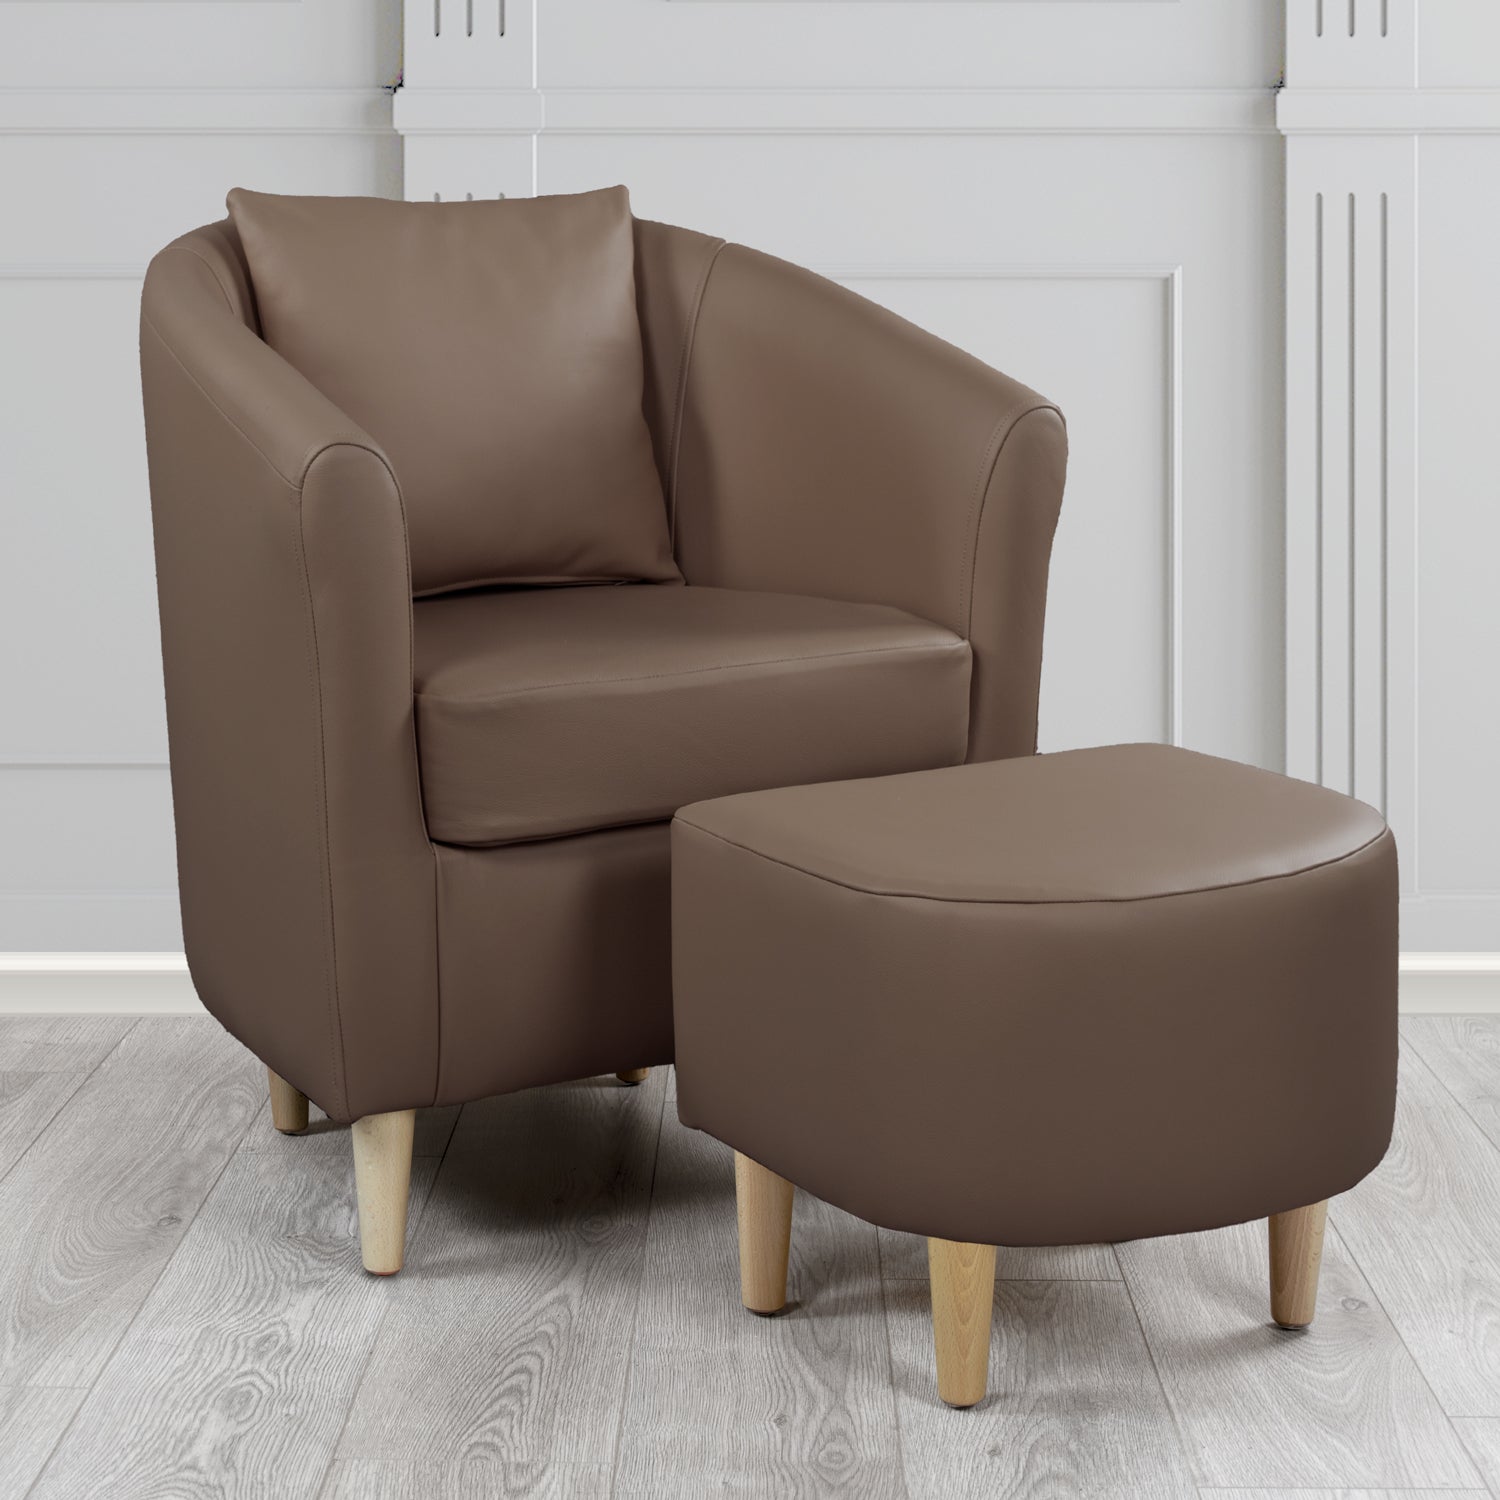 St Tropez Shelly Dark Chocolate Crib 5 Genuine Leather Tub Chair & Footstool Set With Scatter Cushion (6619474362410)